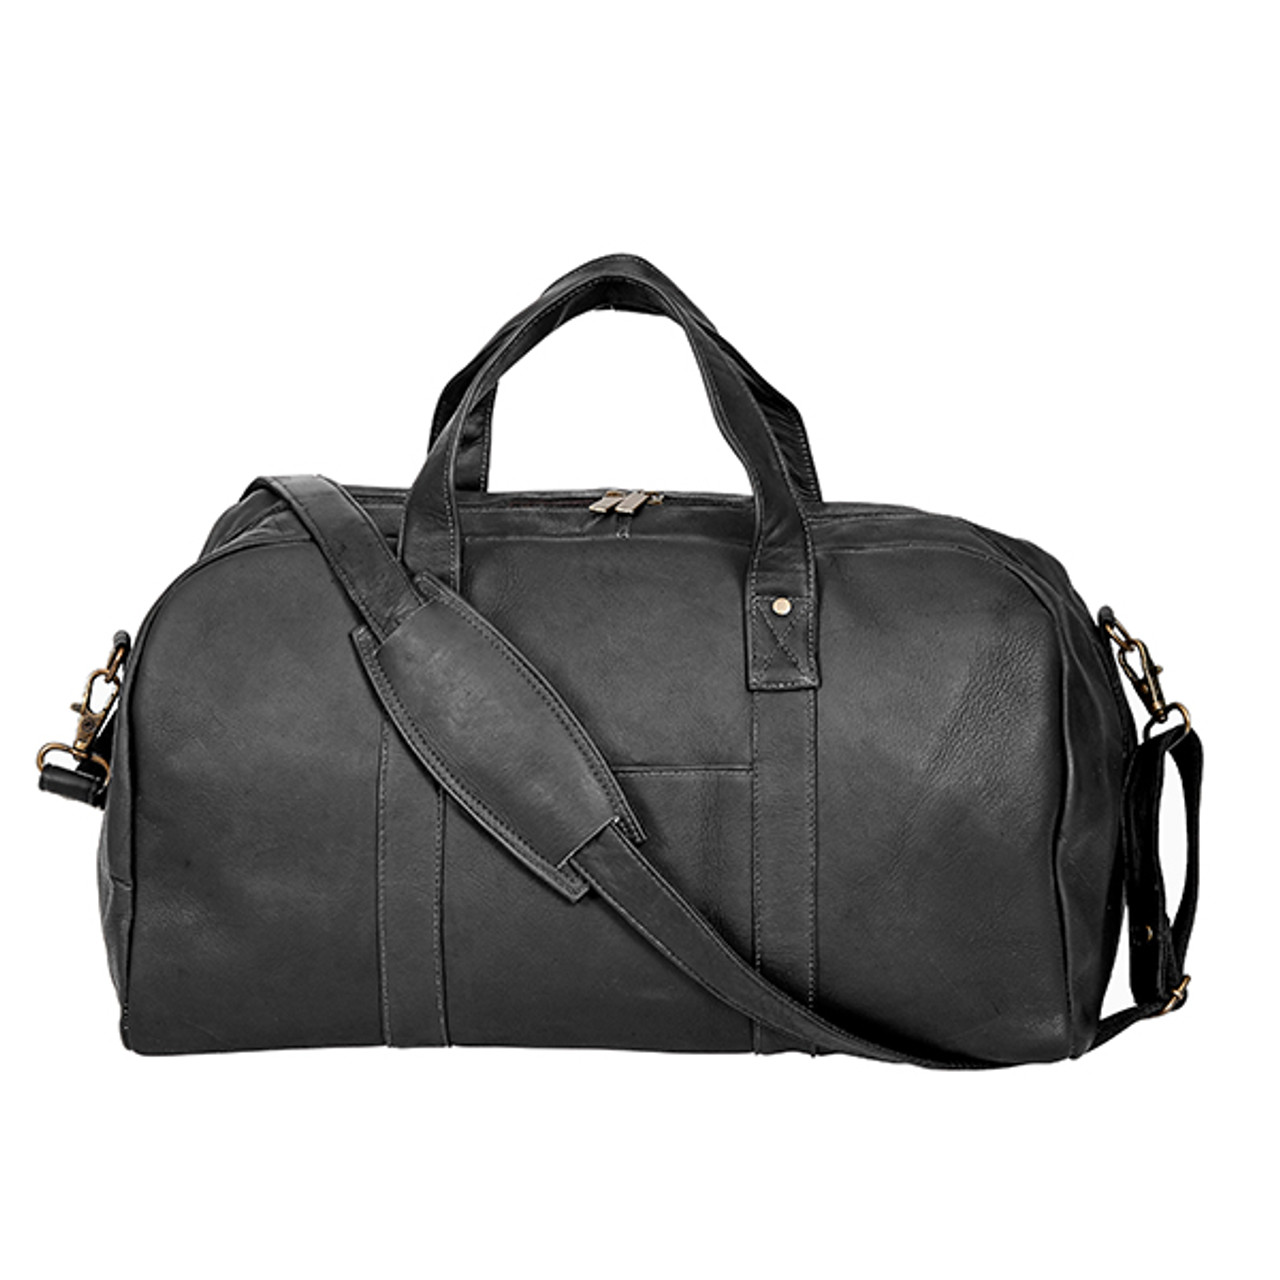 Country Club Duffel Bag in Colombian Leather